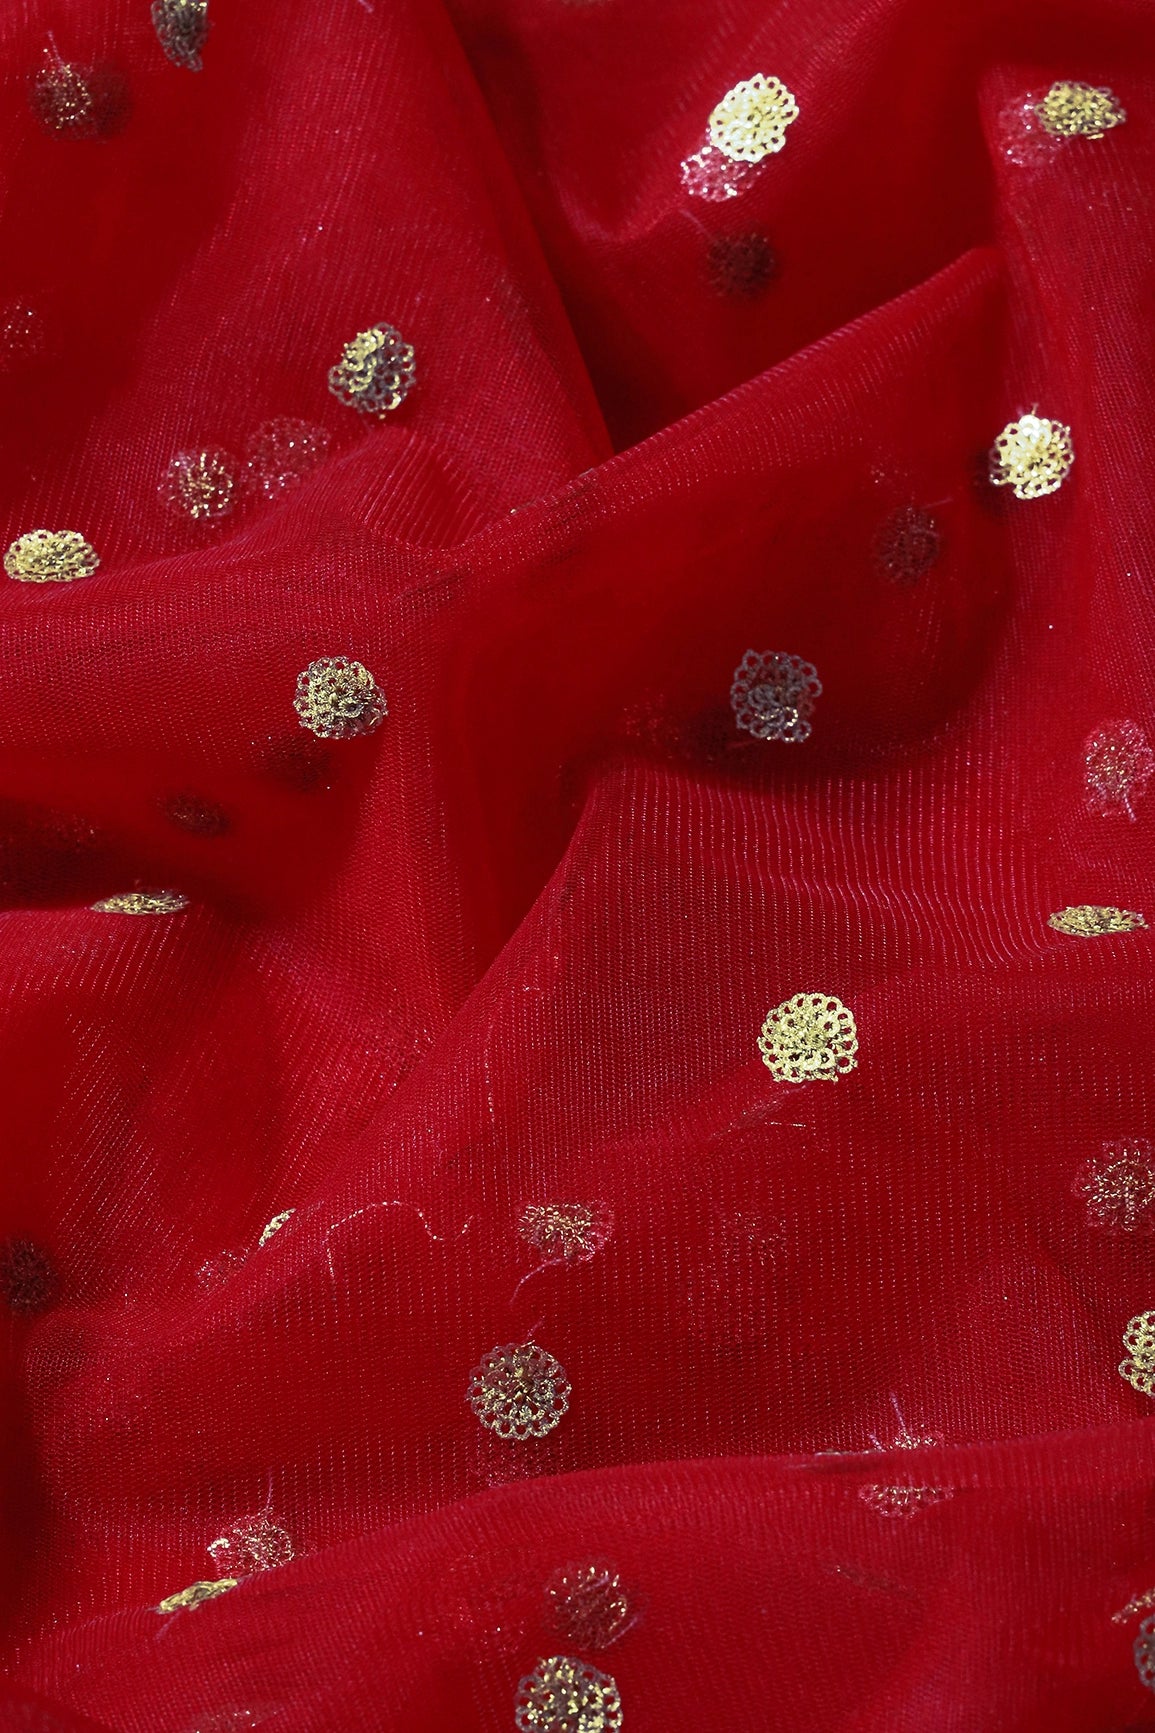 Gold Glitter Sequins Small Motif Embroidery Work On Red Soft Net Fabric